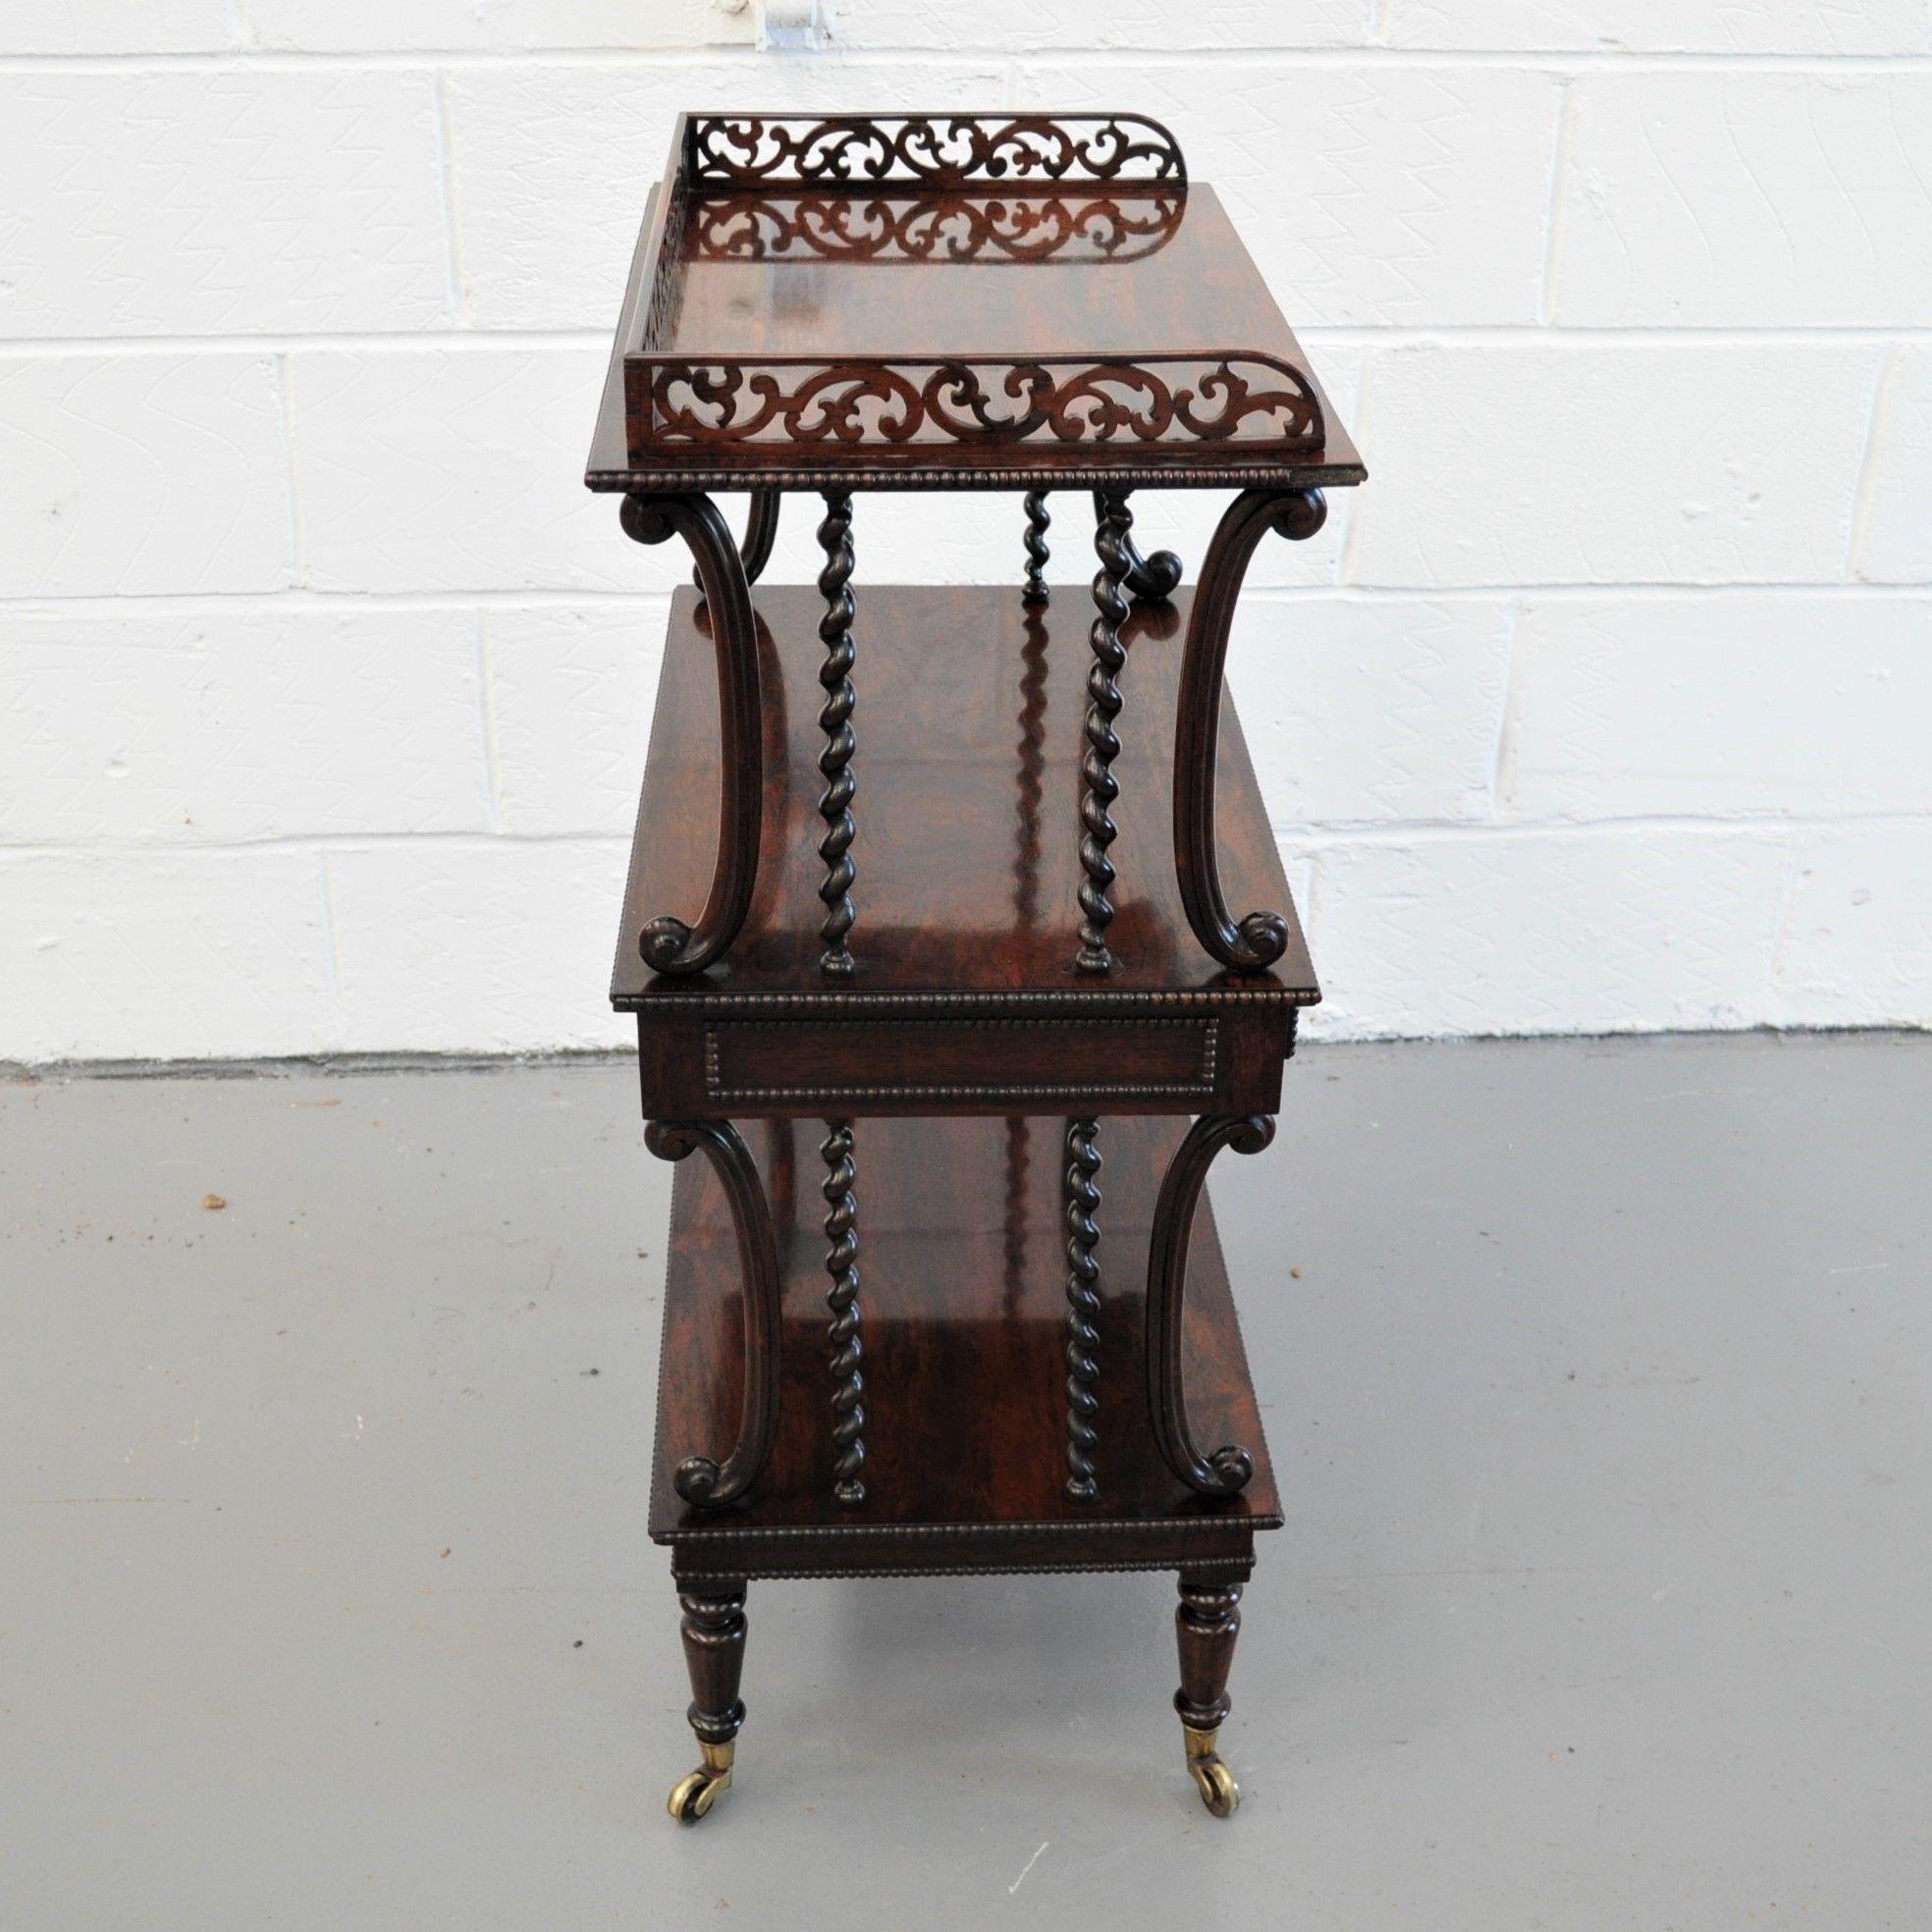 Rare and Unusual Regency Etagere In Good Condition For Sale In Folkestone, GB